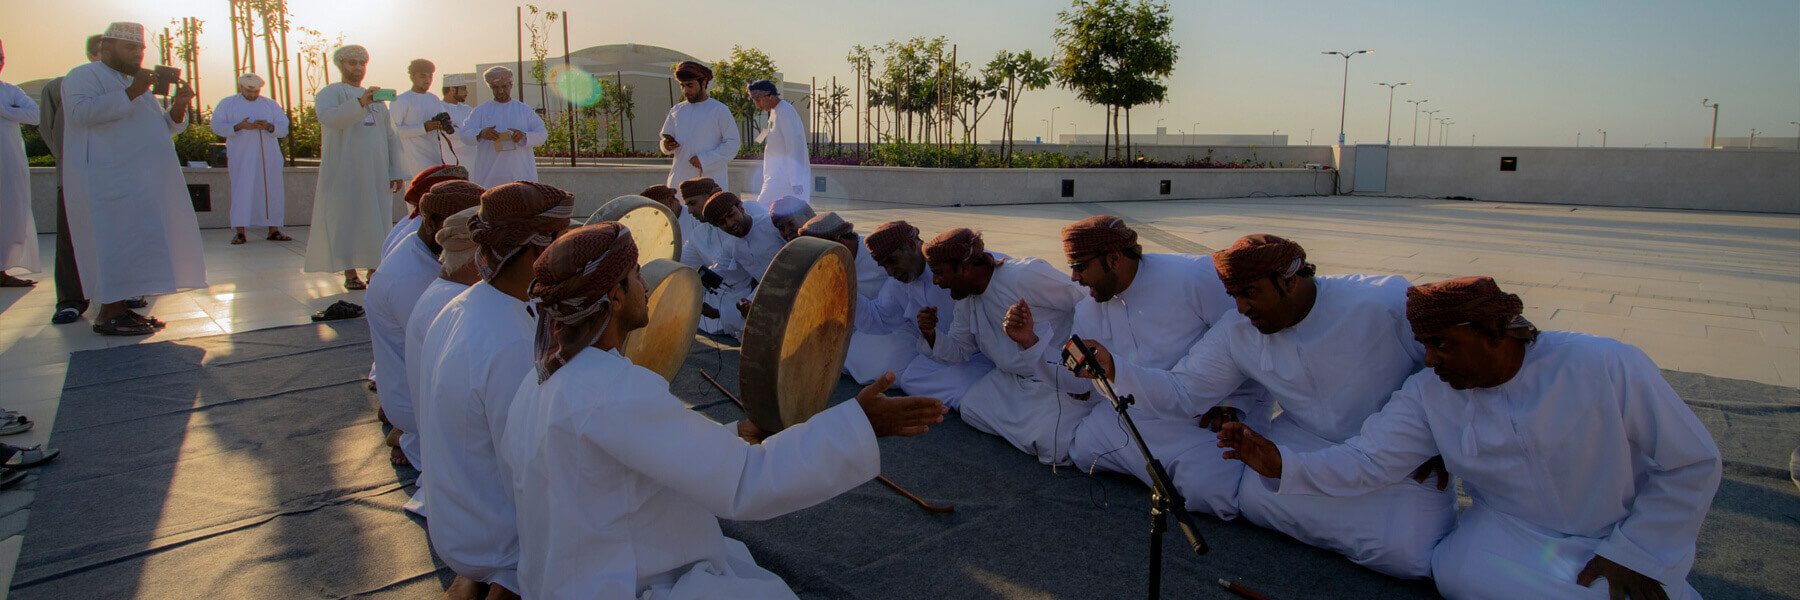 Introducing the historical tourist attractions of Oman, Muscat, Omani folk dances and songs